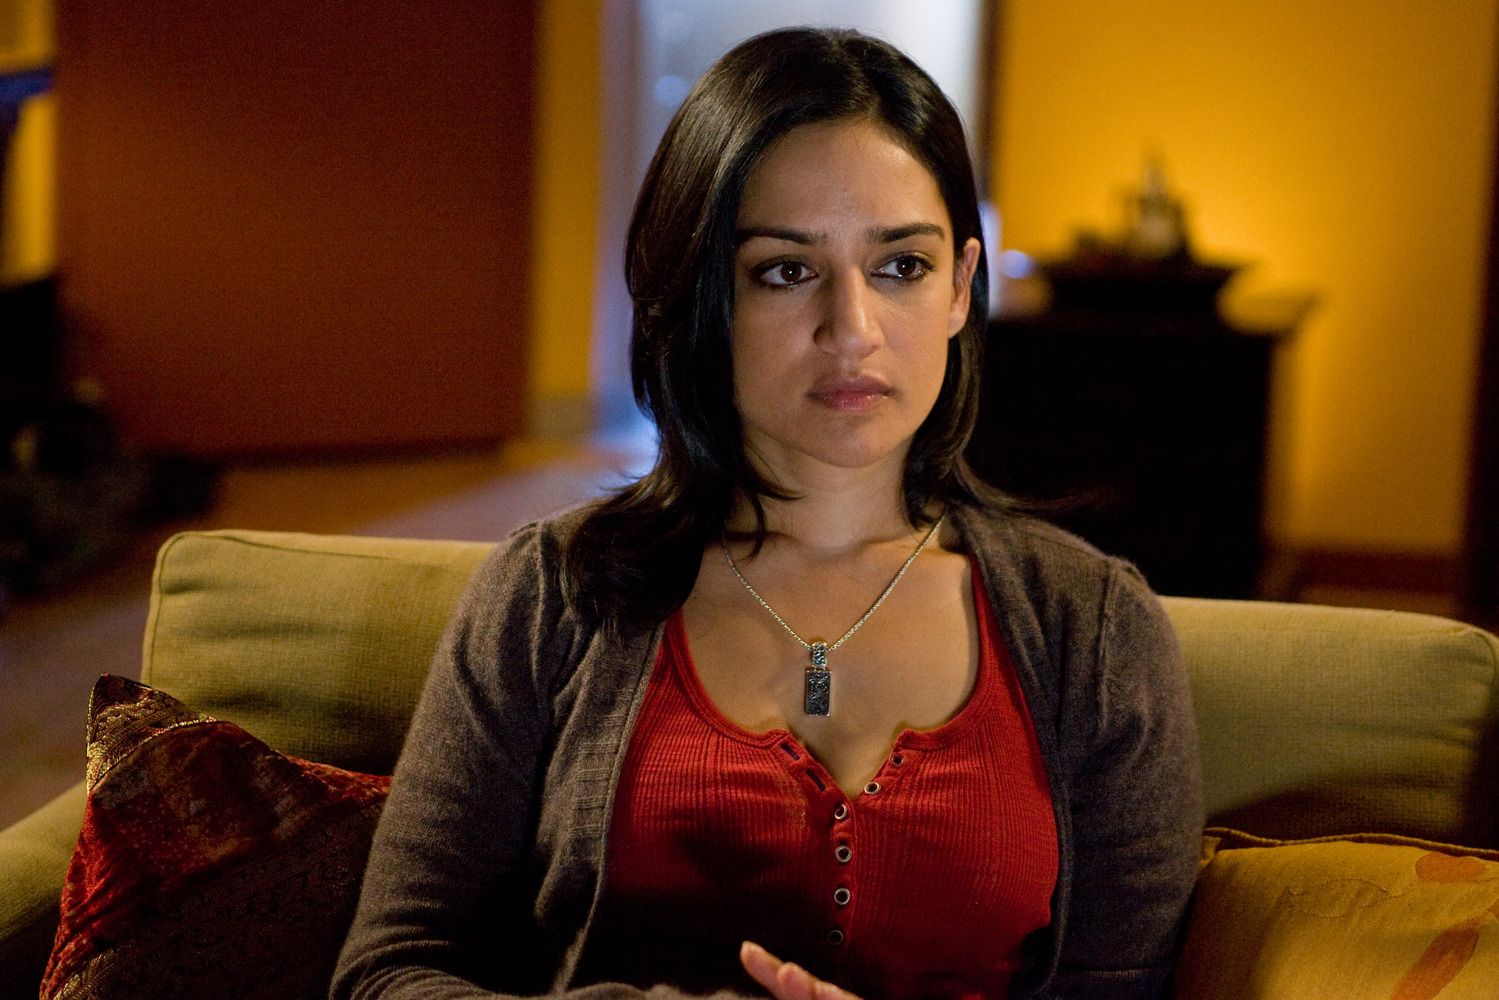 Panjabi in one of her final episodes